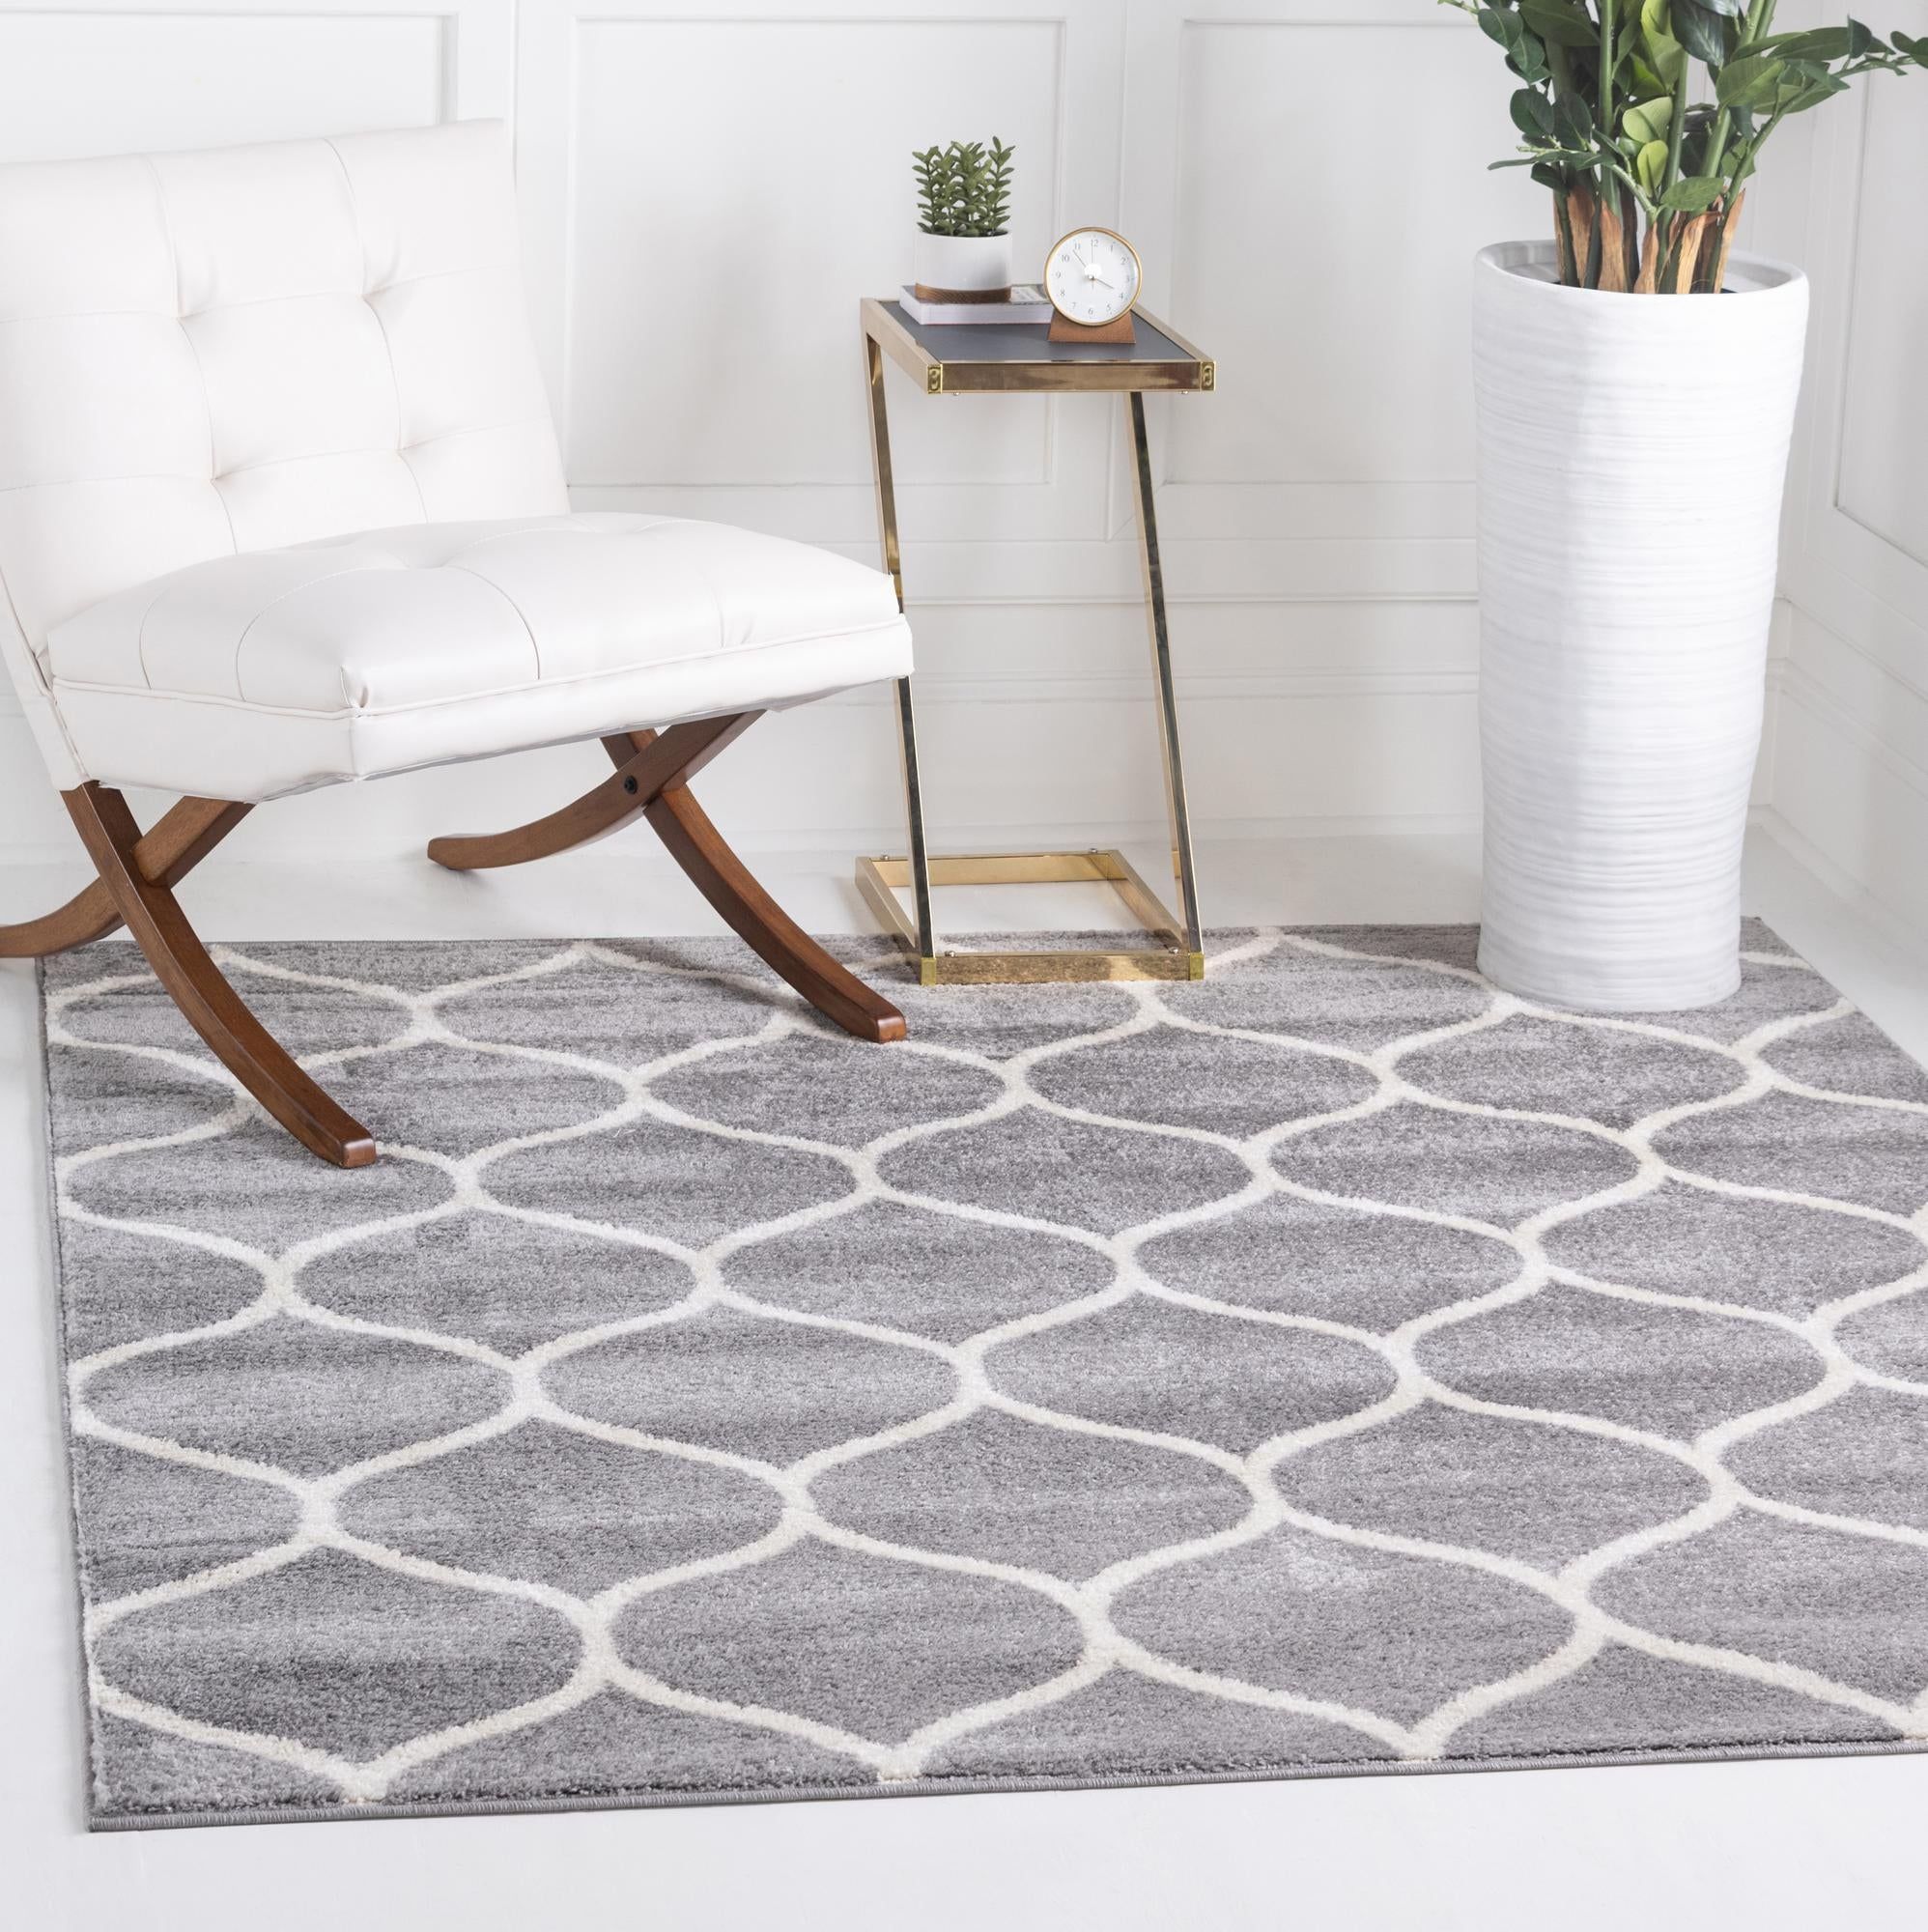 Unique Loom Rounded Trellis Frieze Rug Light Gray/Ivory 7' 1" Square  Trellis Traditional Perfect For Dining Room Living Room Bed Room Kids Room  – Walmart Regarding Frieze Square Rugs (View 3 of 15)